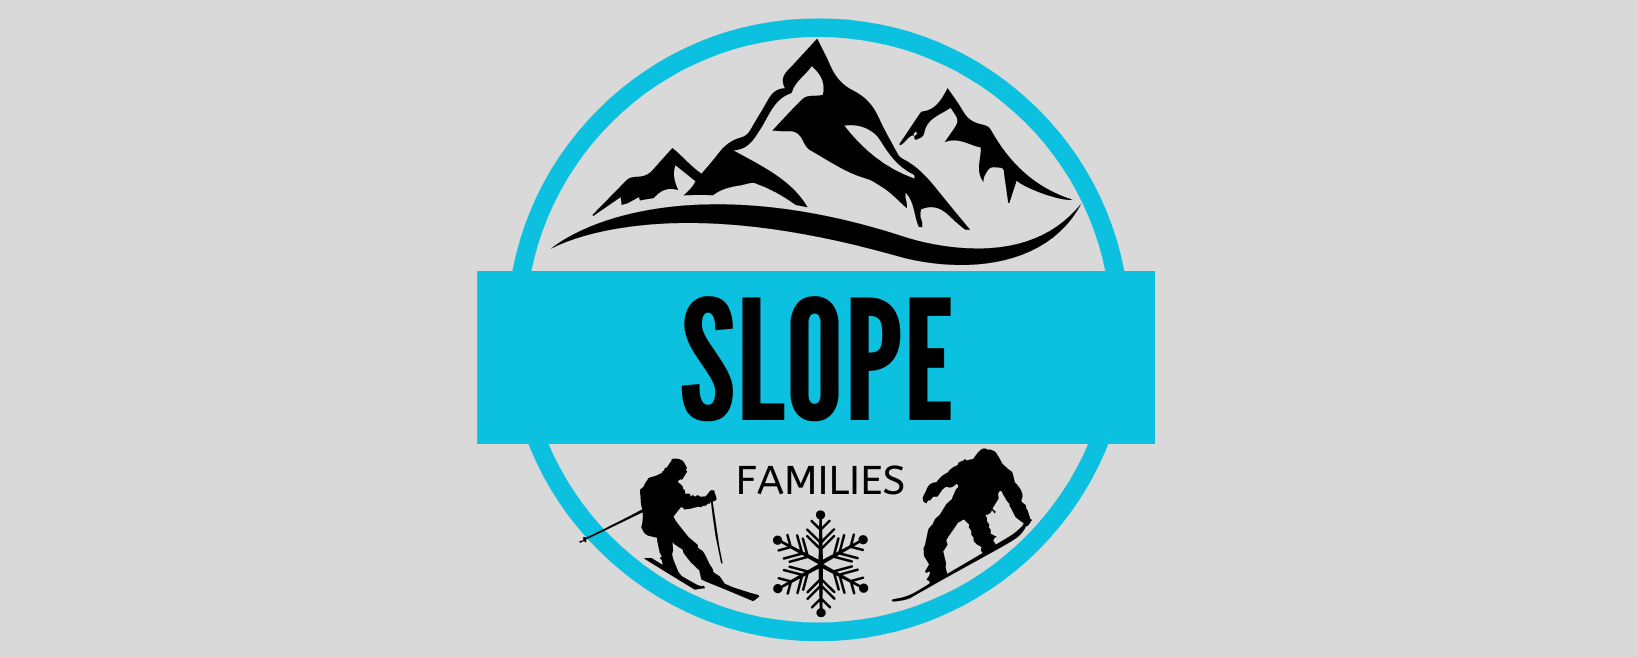 SLOPE FAMILIES – Slope Families